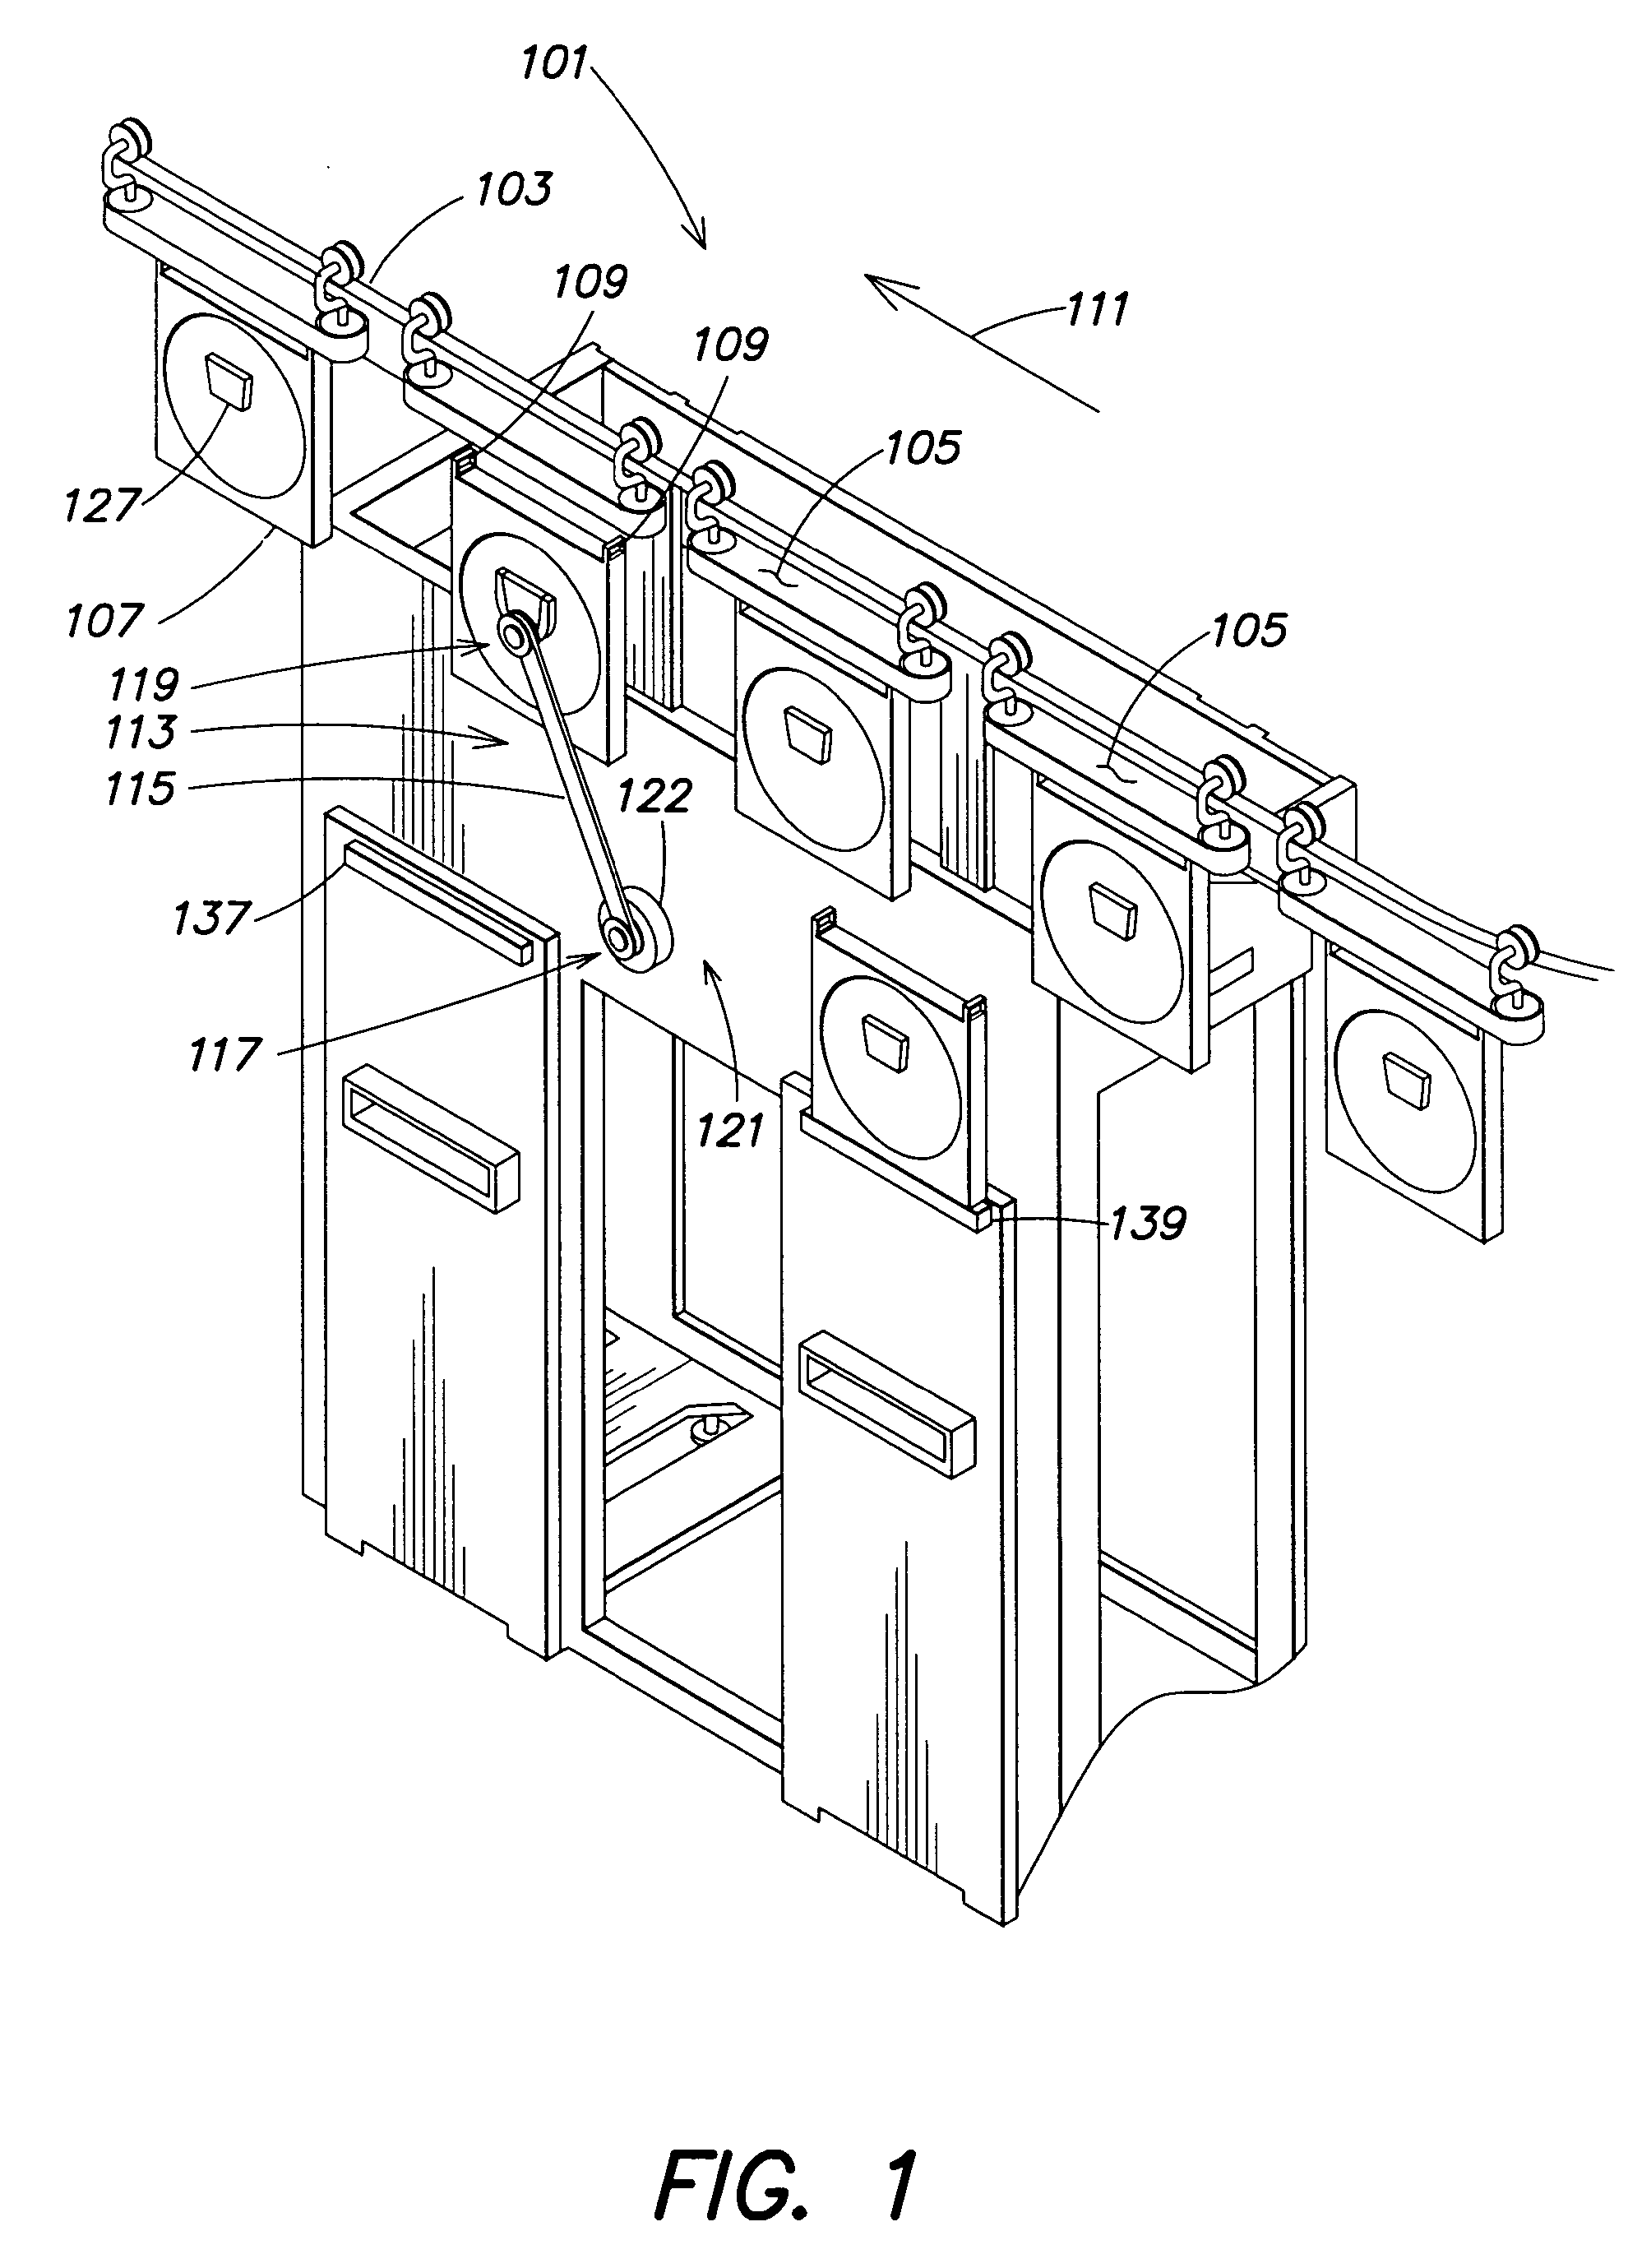 Method and apparatus for unloading substrate carriers from substrate carrier transport system